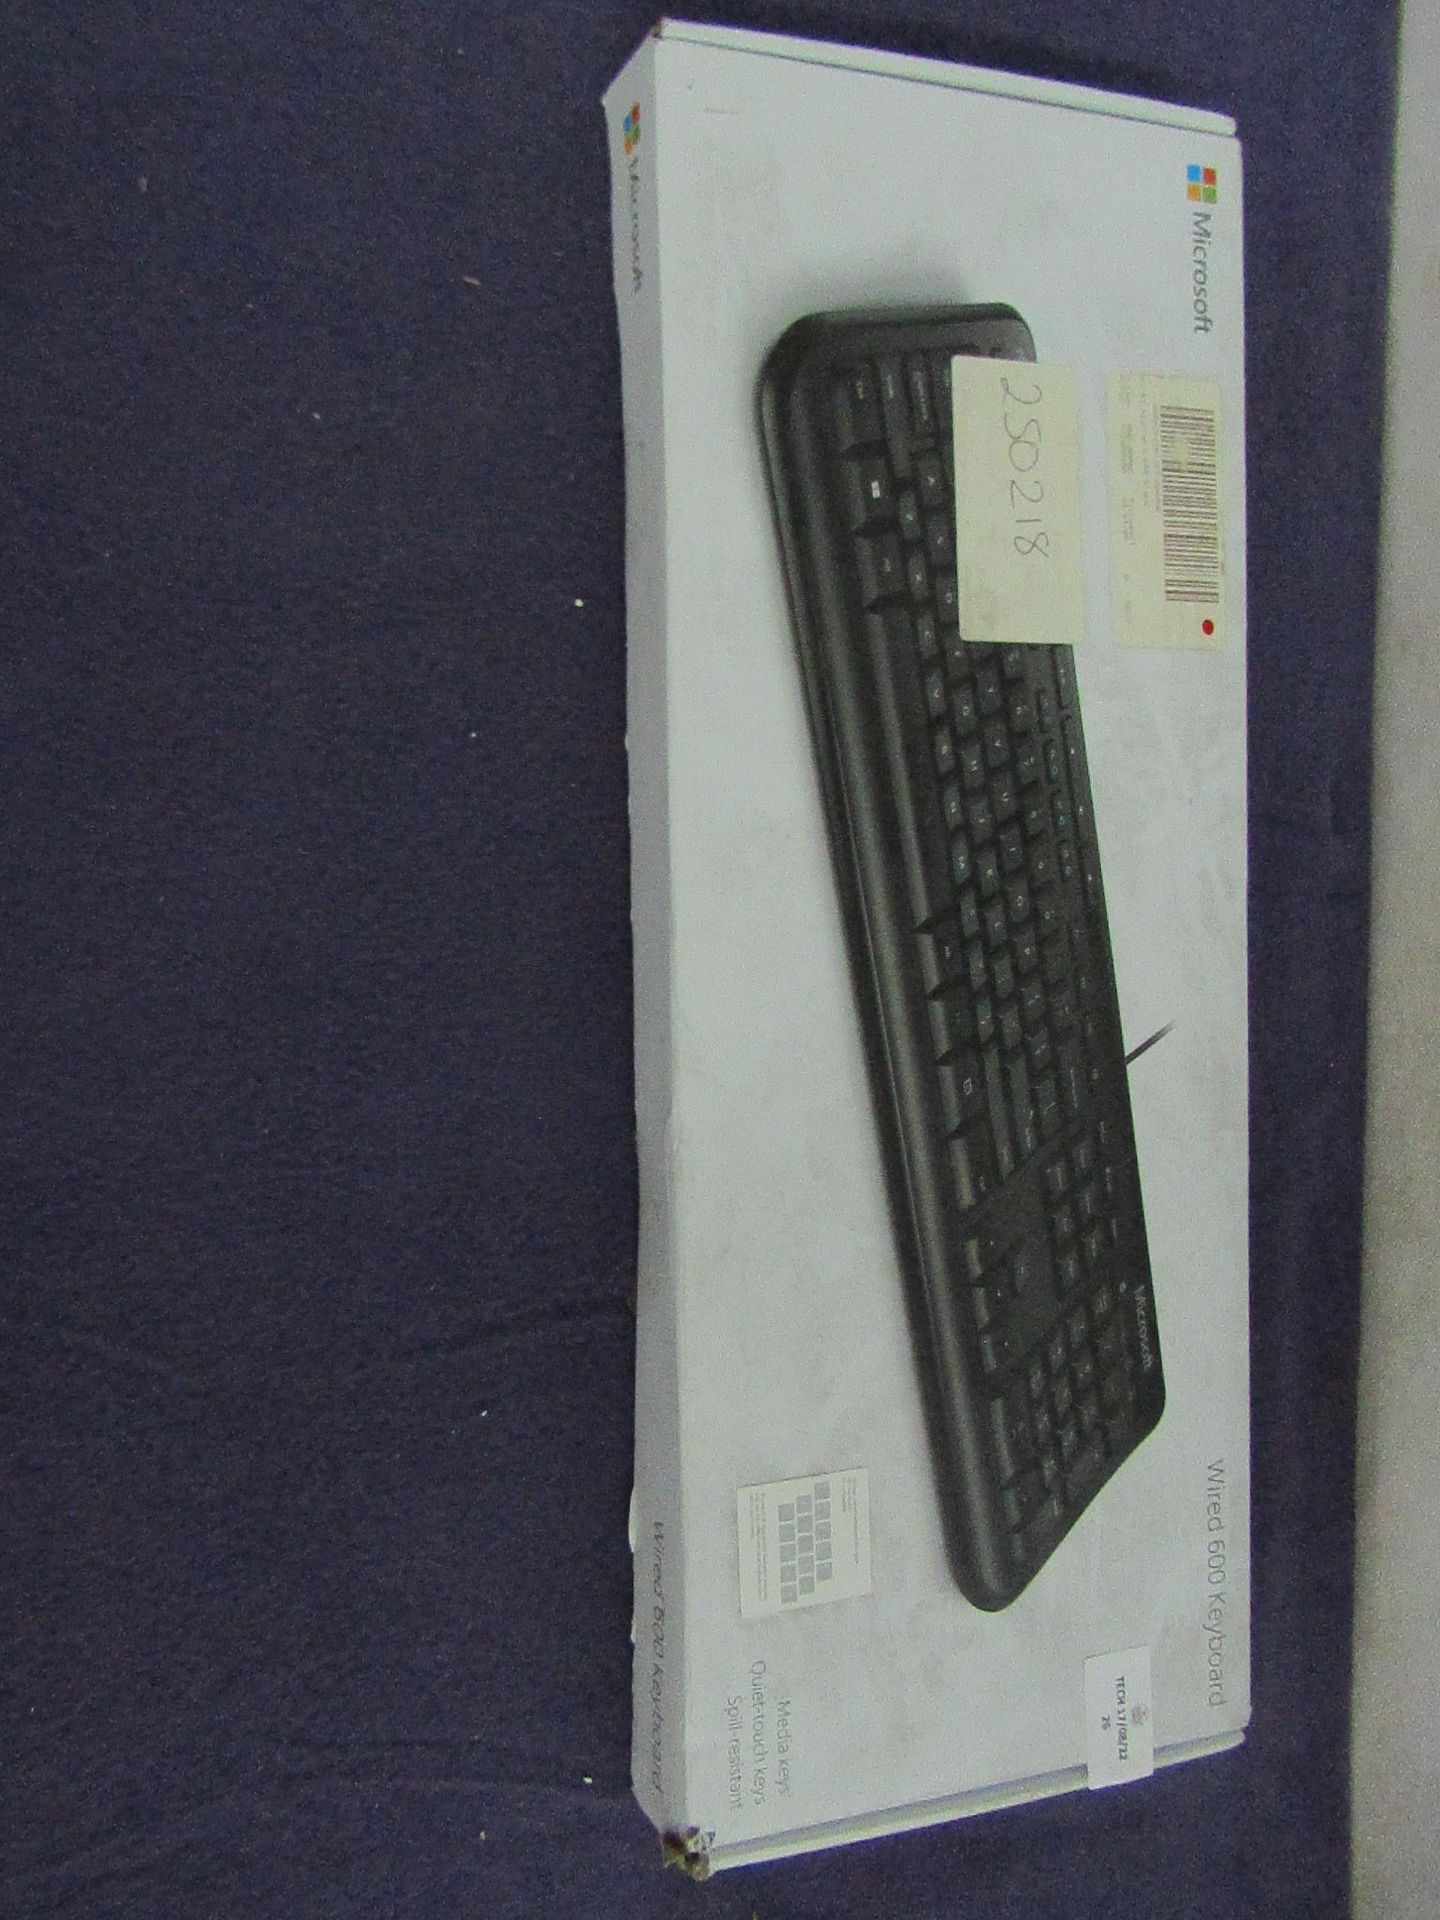 Microsoft - Wired 600 Keyboard - Black - Untested & Boxed.